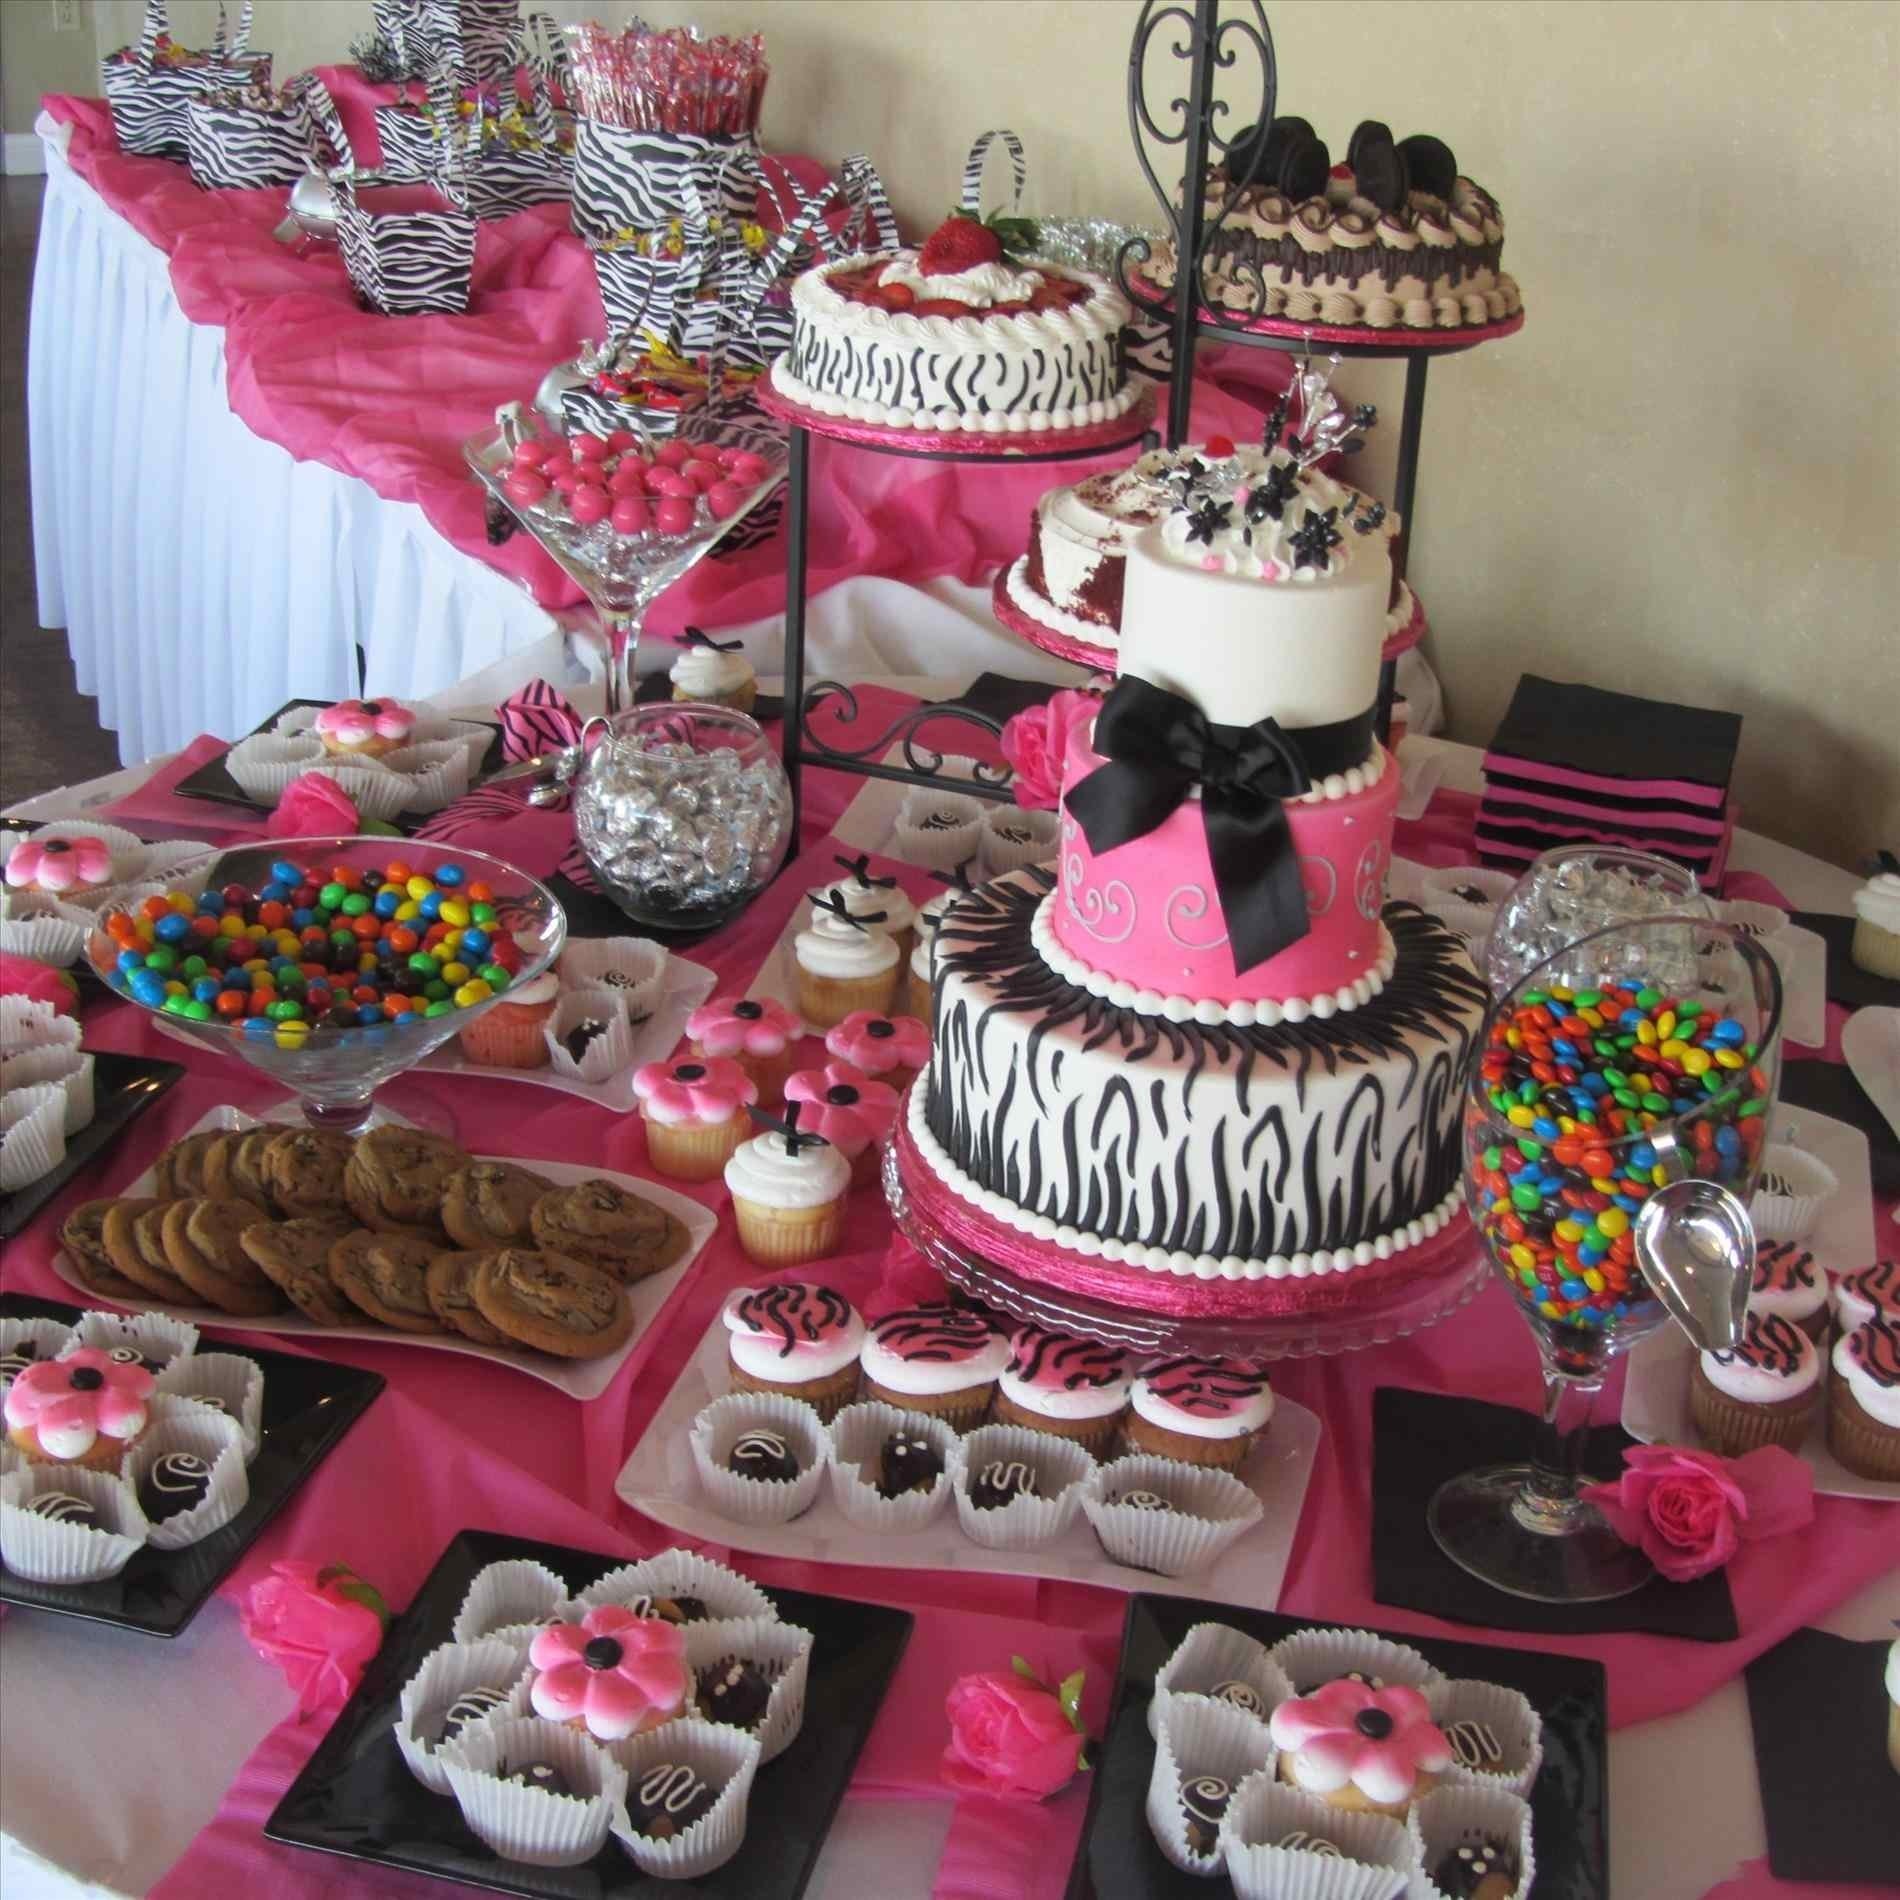 Sweet 16 Birthday Ideas For A Girl - www.inf-inet.com